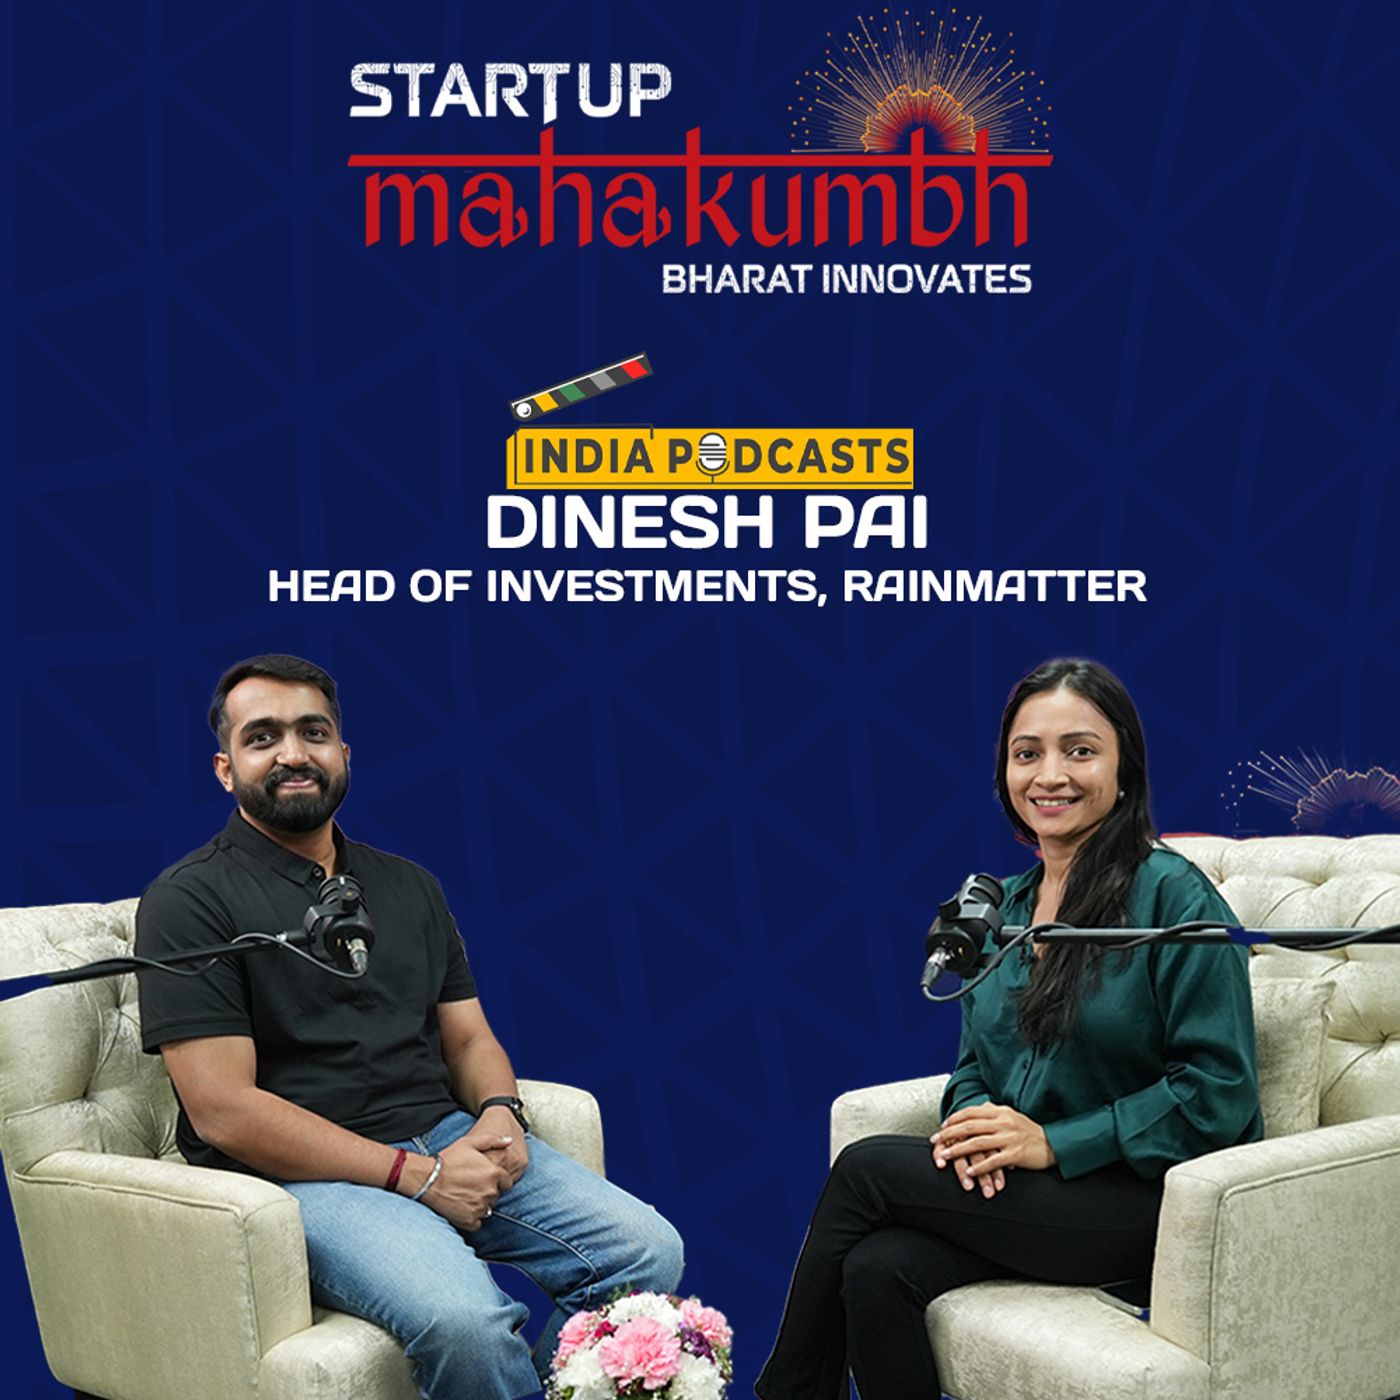 Startup Is A Business With High Growth: Dinesh Pai, Head Of Investments, Rainmatter